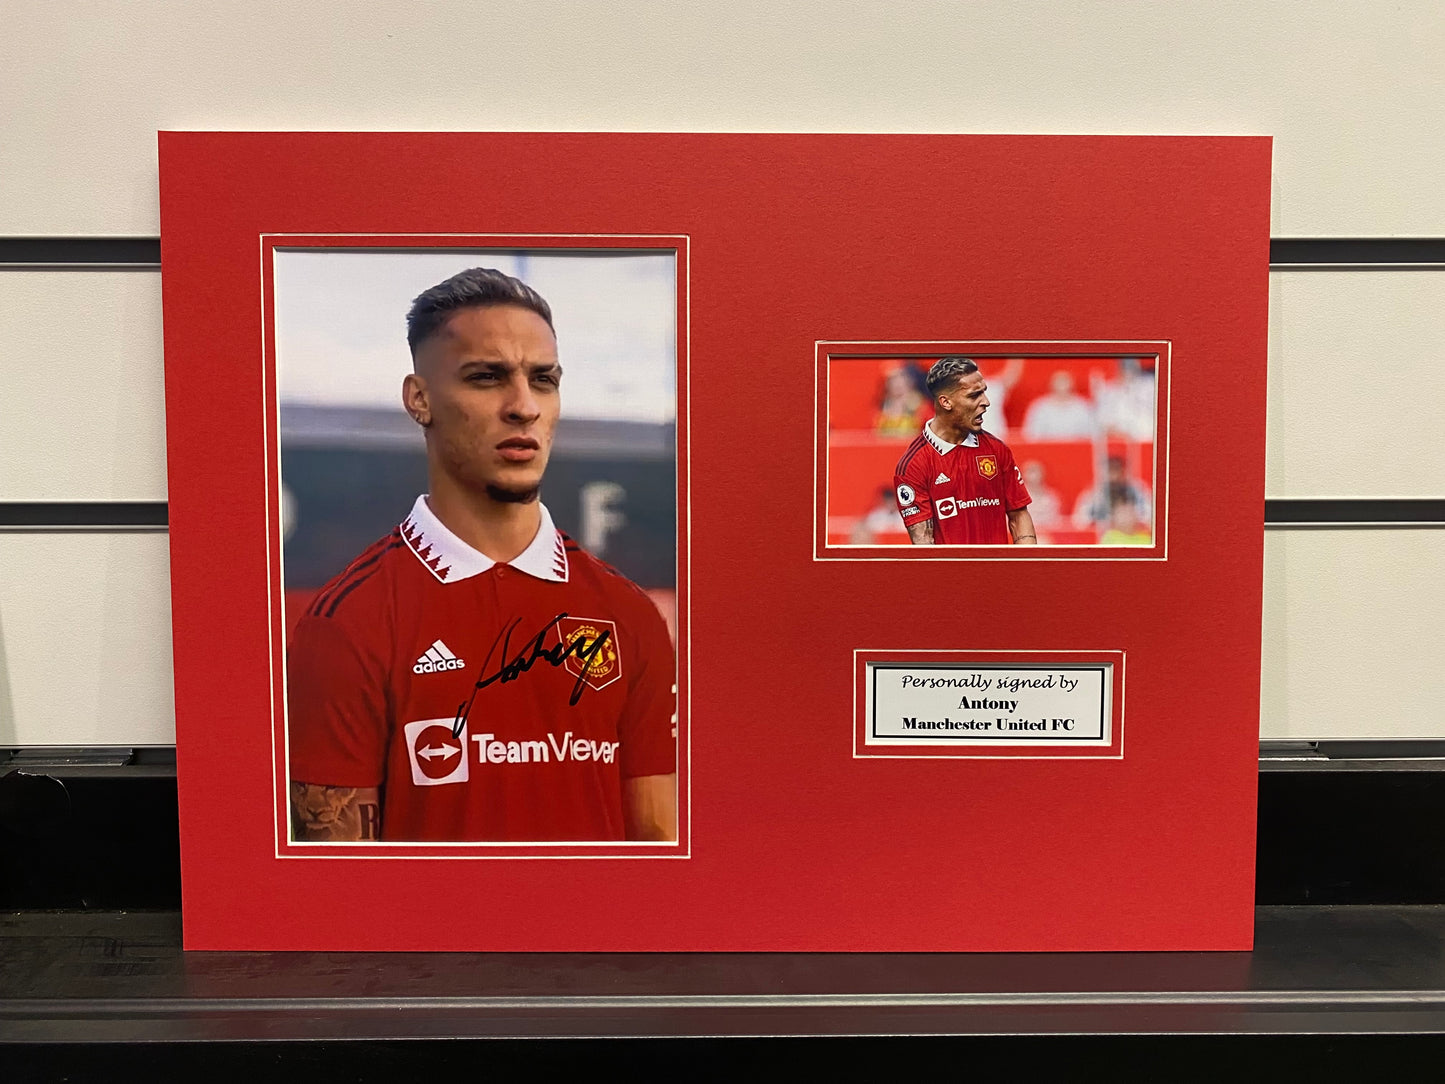 Antony - Manchester United FC - 16x12in signed photo mount - MUFC memorabilia, gift, display